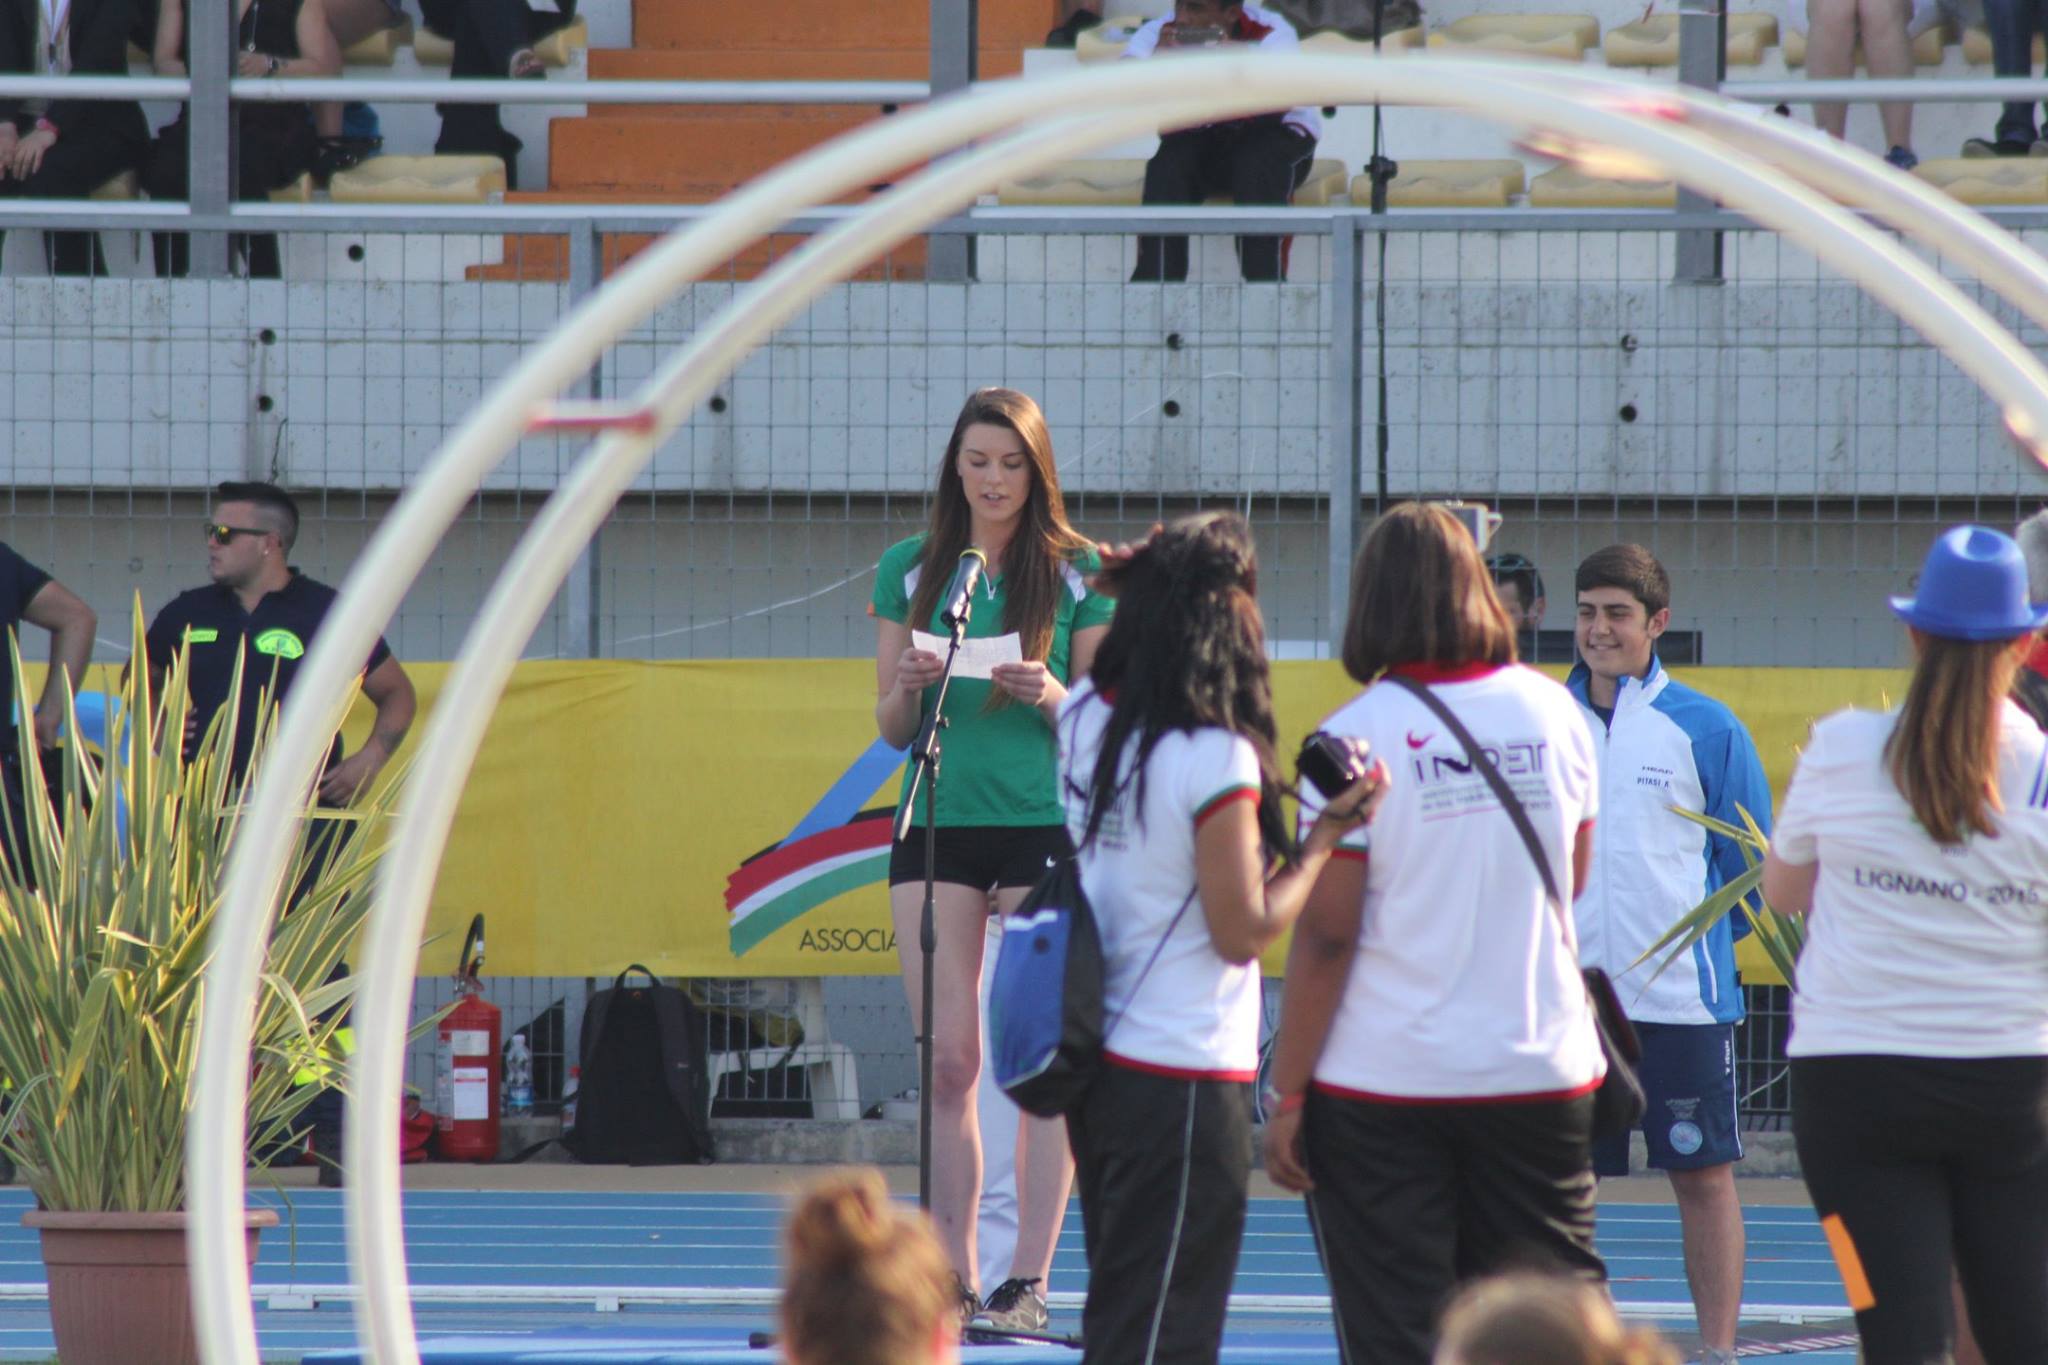 Emily Rogers reading Oath at CSIT World Sports Games Opening Ceremony (Italy, June 2015)